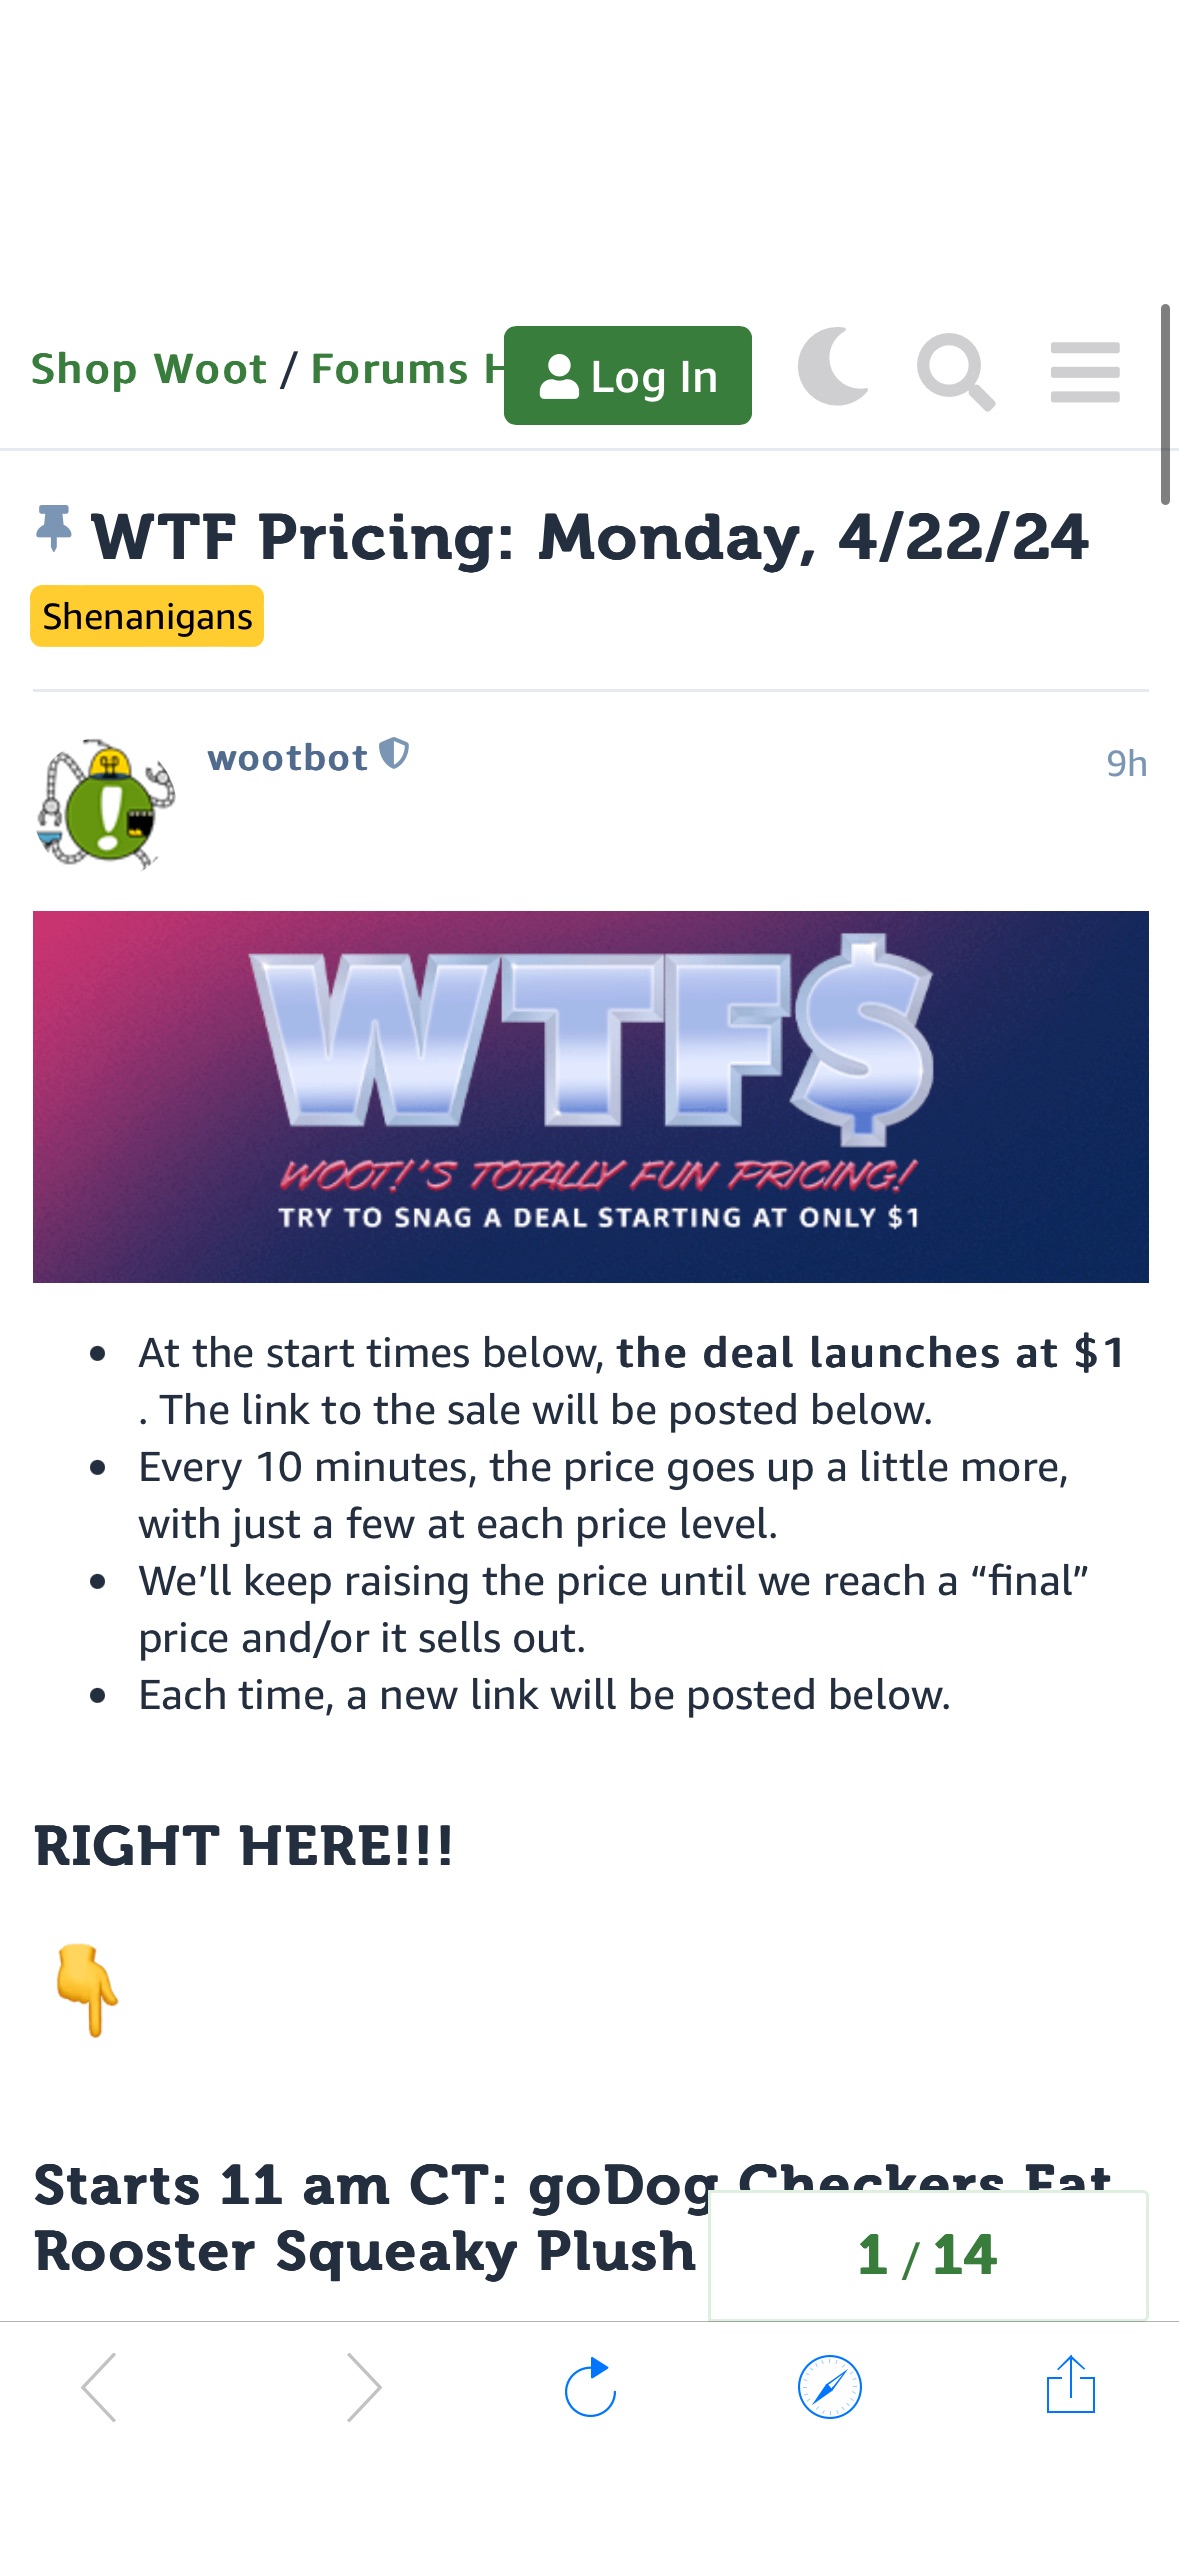 Woot! – WTF Pricing TODAY You Can Score Items for Only $1.00!!